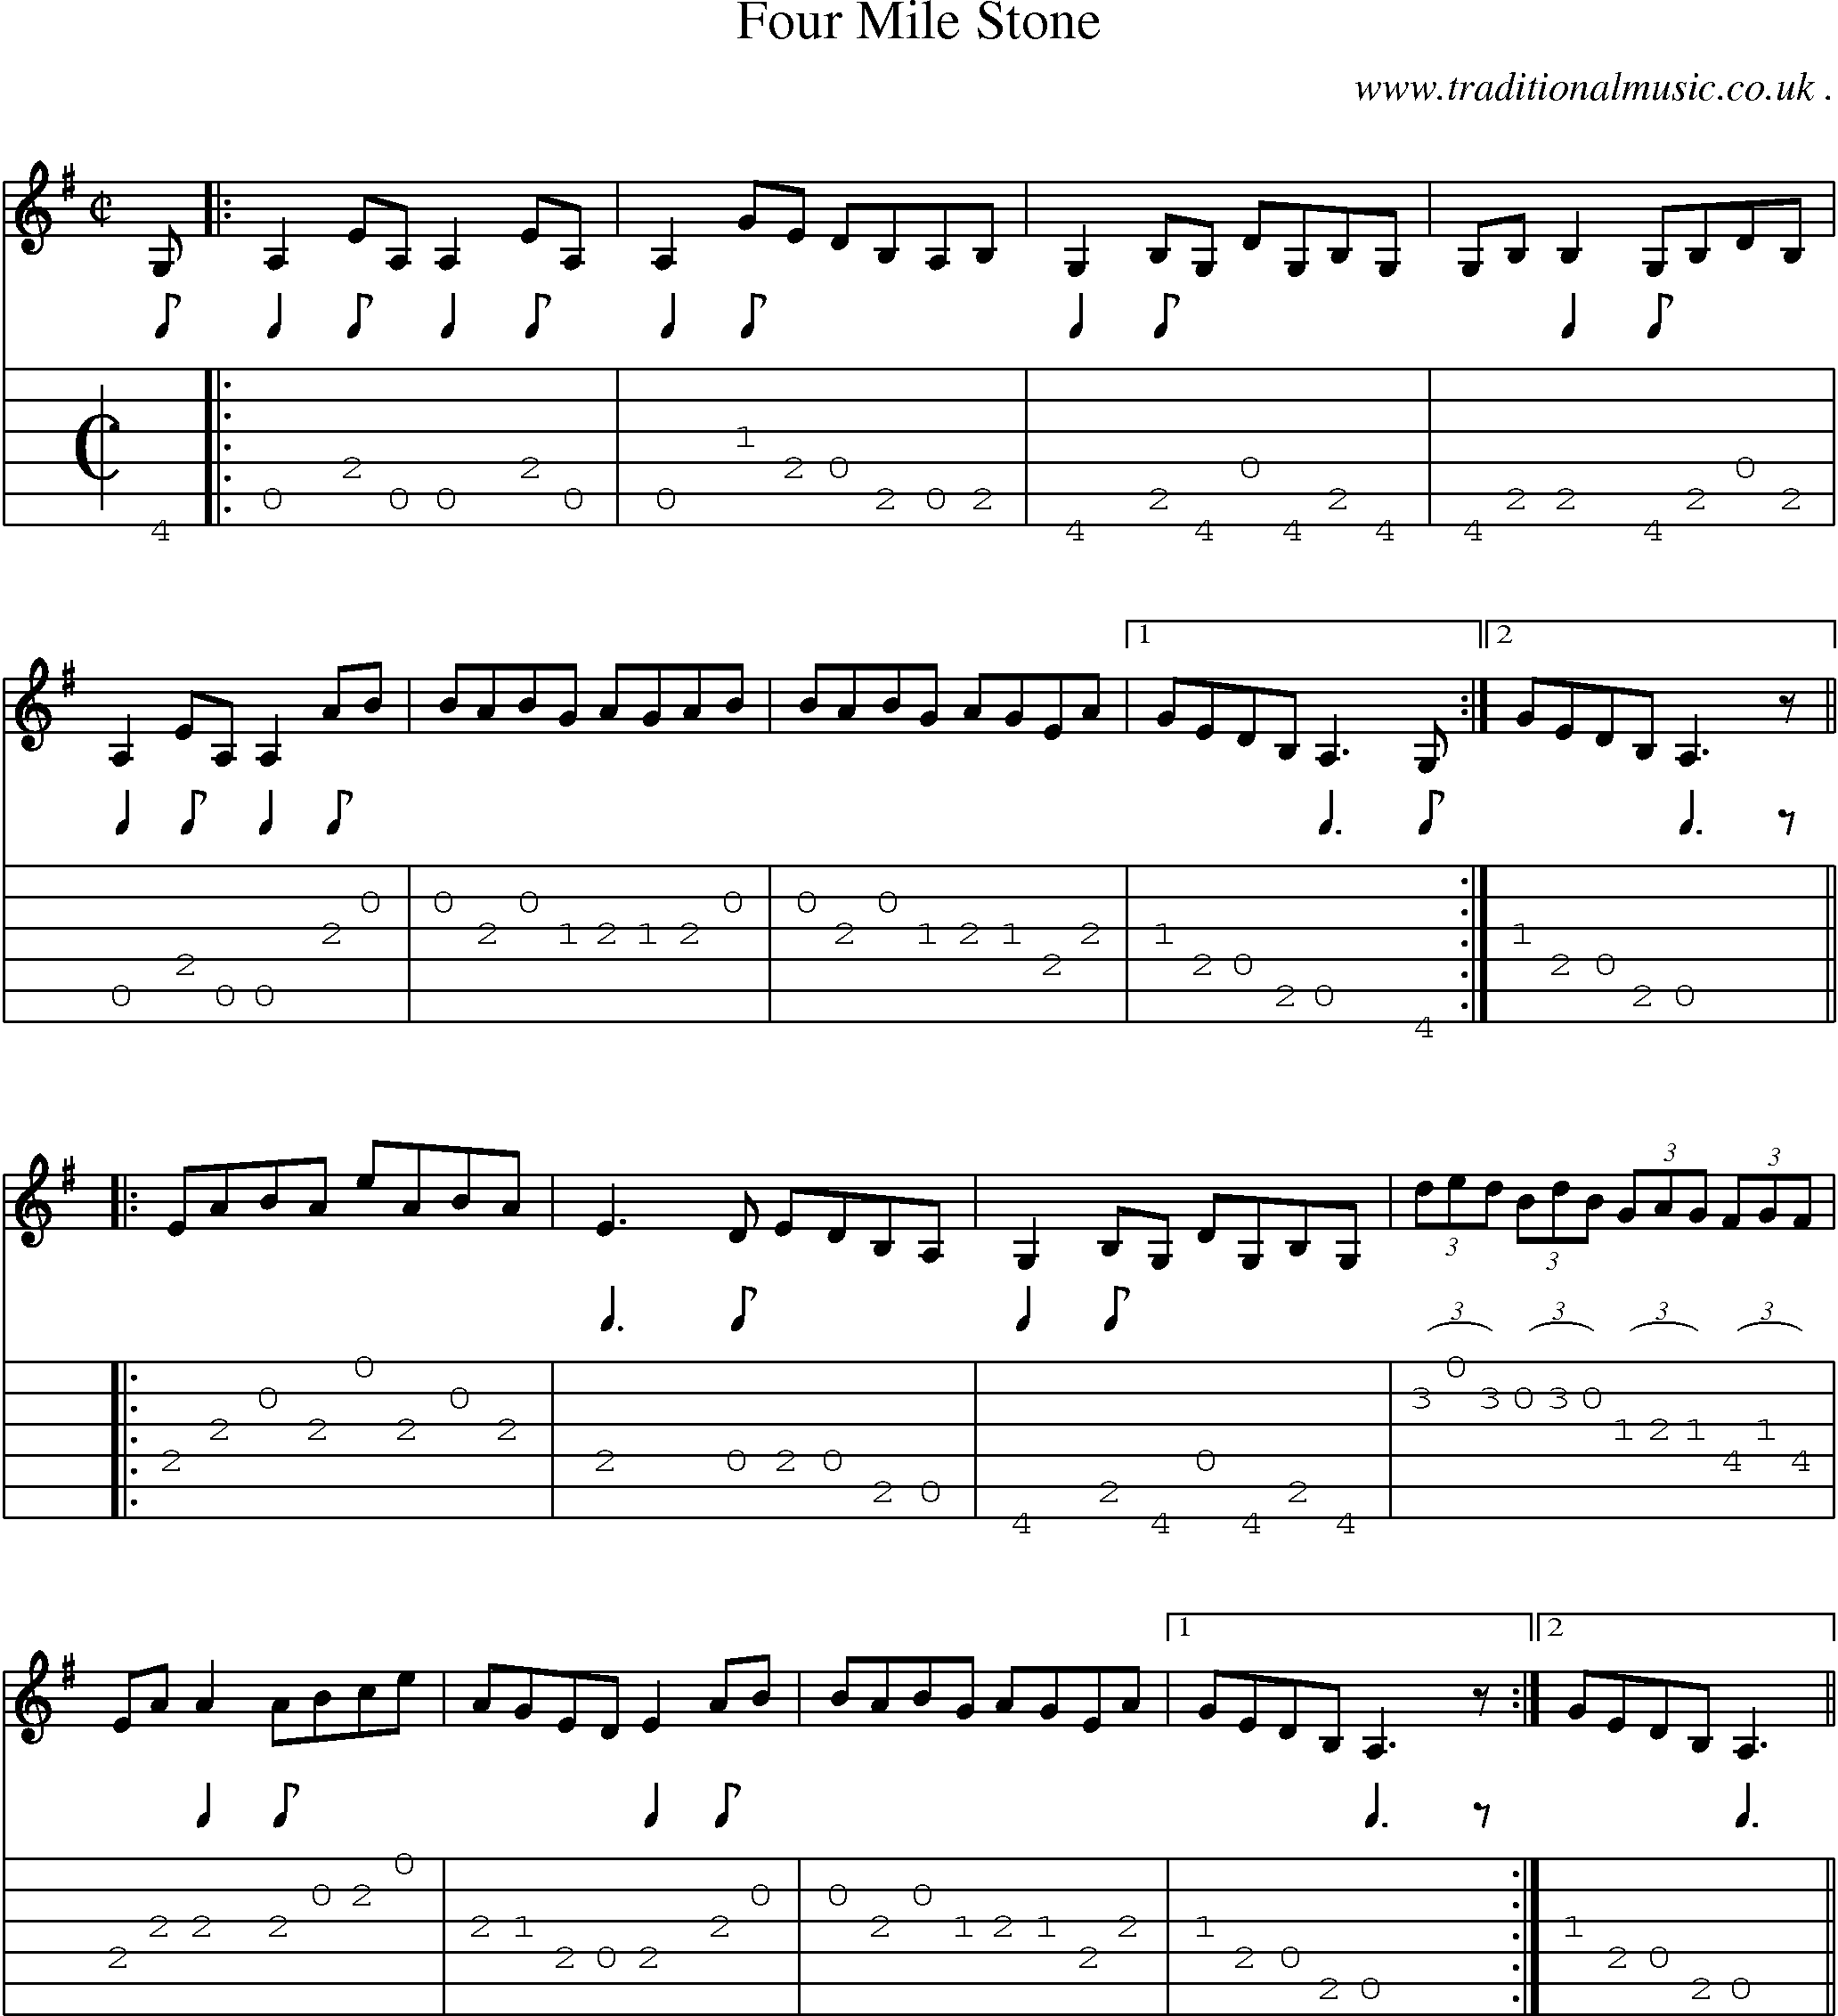 Sheet-Music and Guitar Tabs for Four Mile Stone